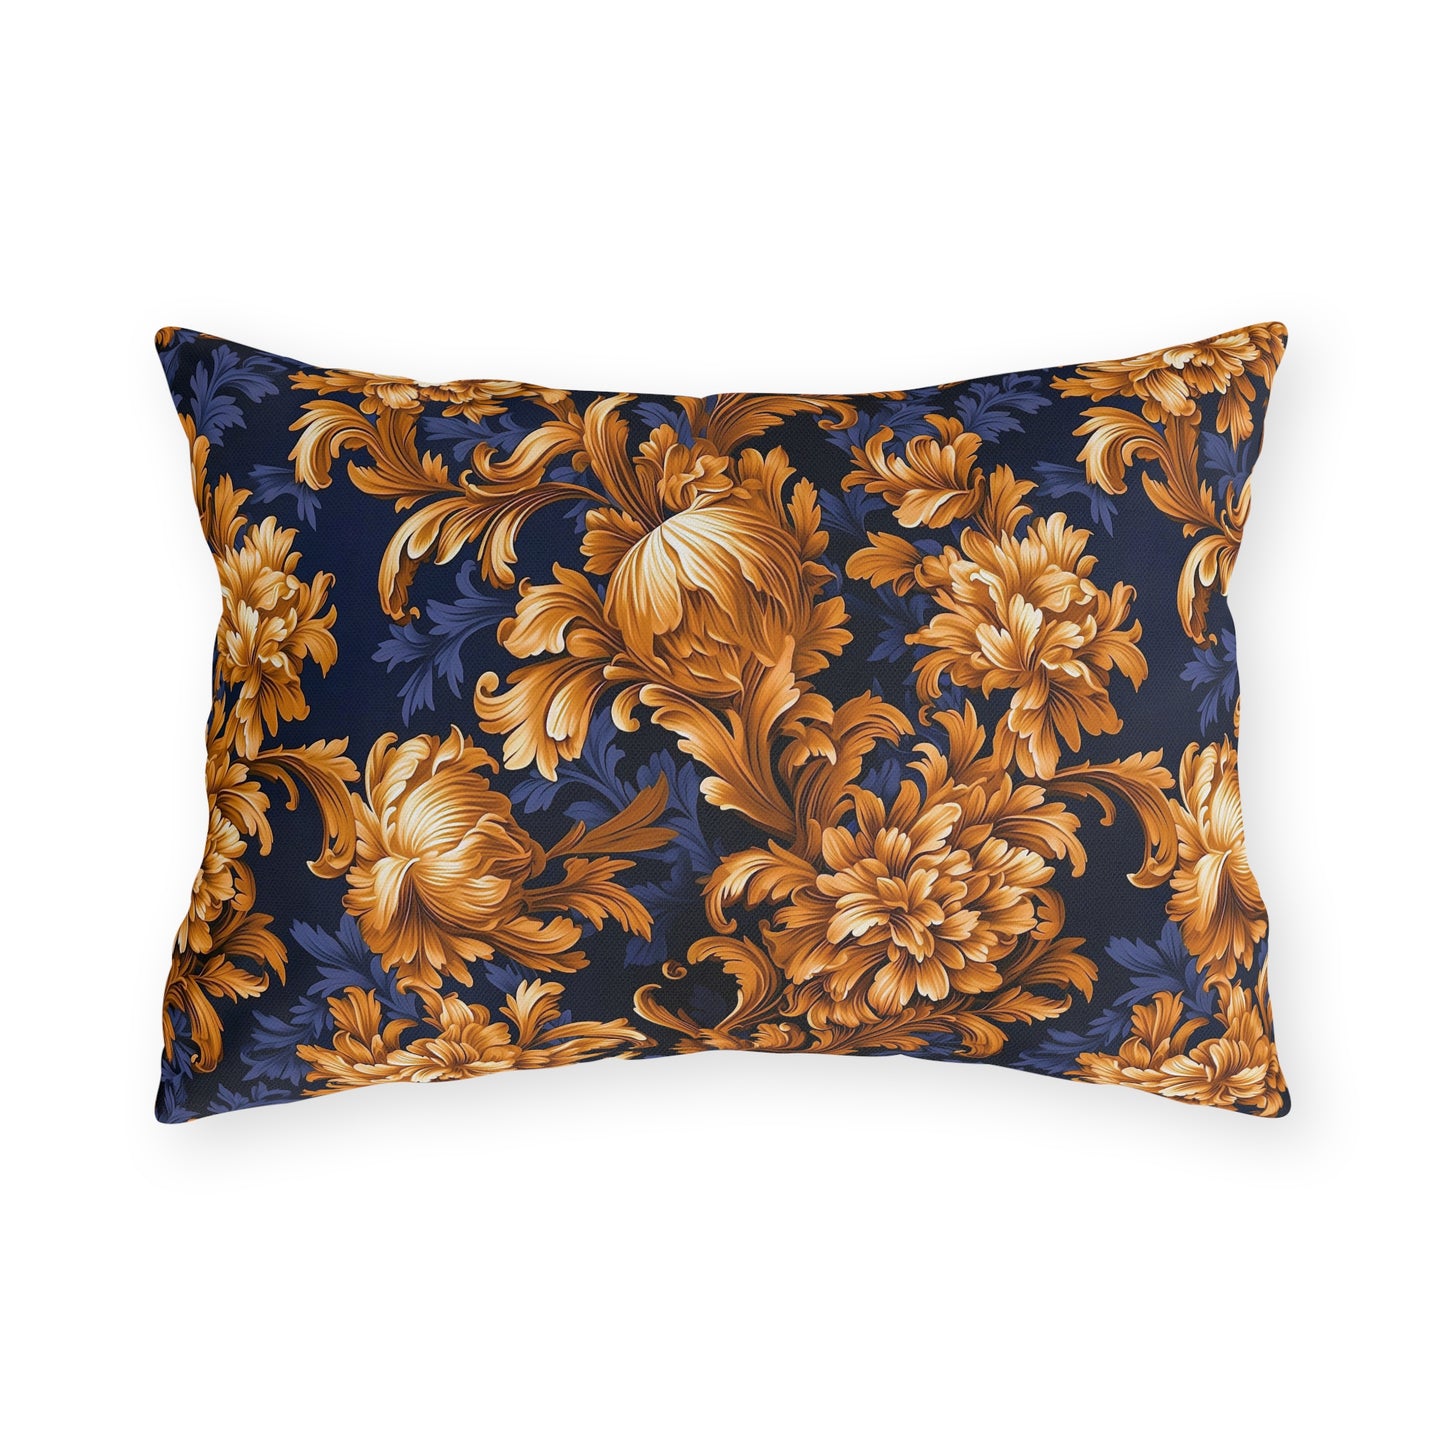 Outdoor Pillows | Gold & Navy Baroque Floral Throw Pattern from The Curated Goose